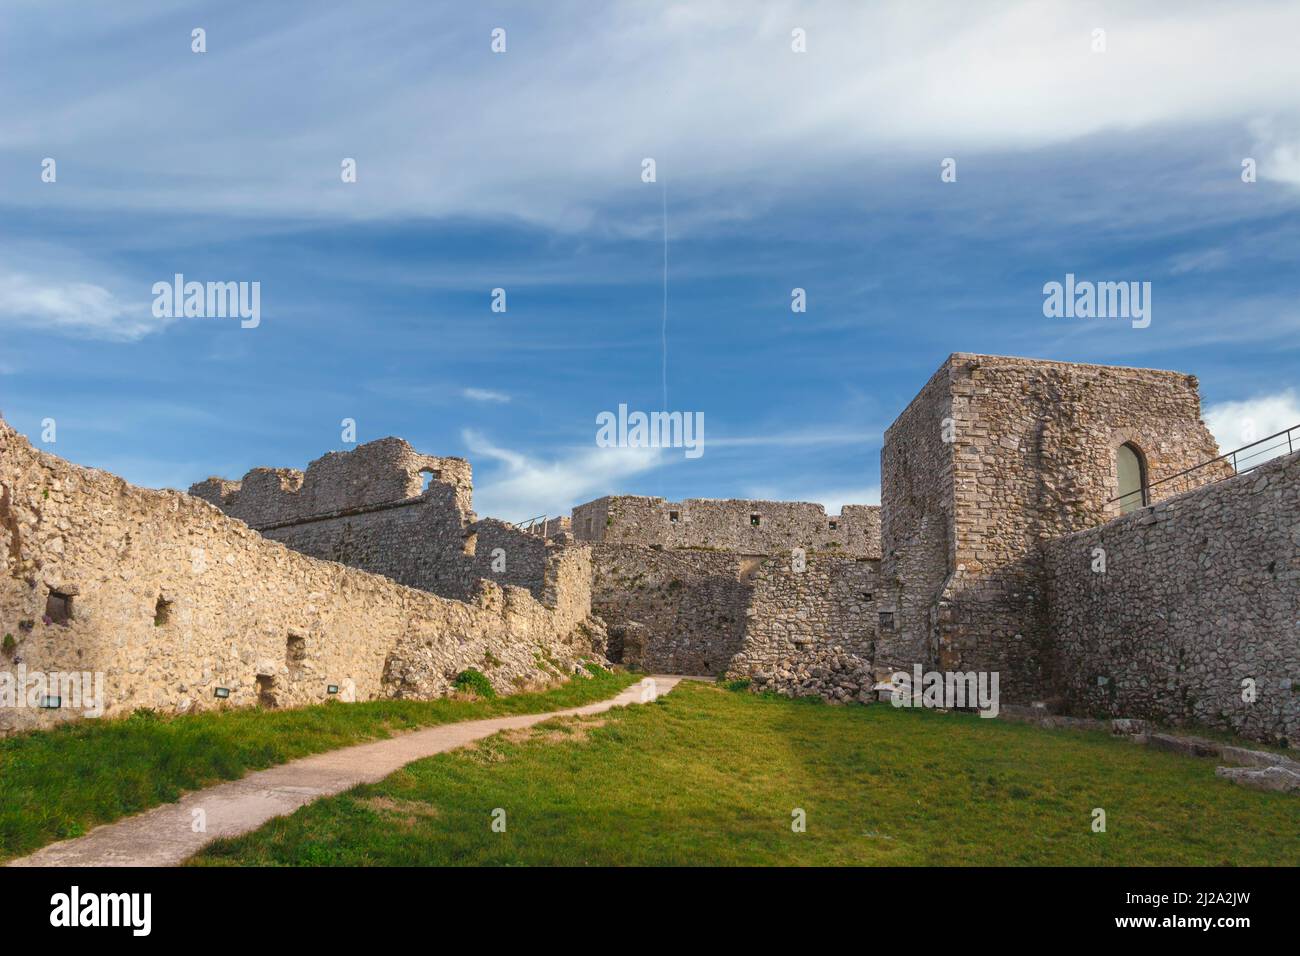 View of the Monte Sant'Angelo Castle.It is an architecture in the Apulian city of Monte Sant'Angelo, Italy. Stock Photo